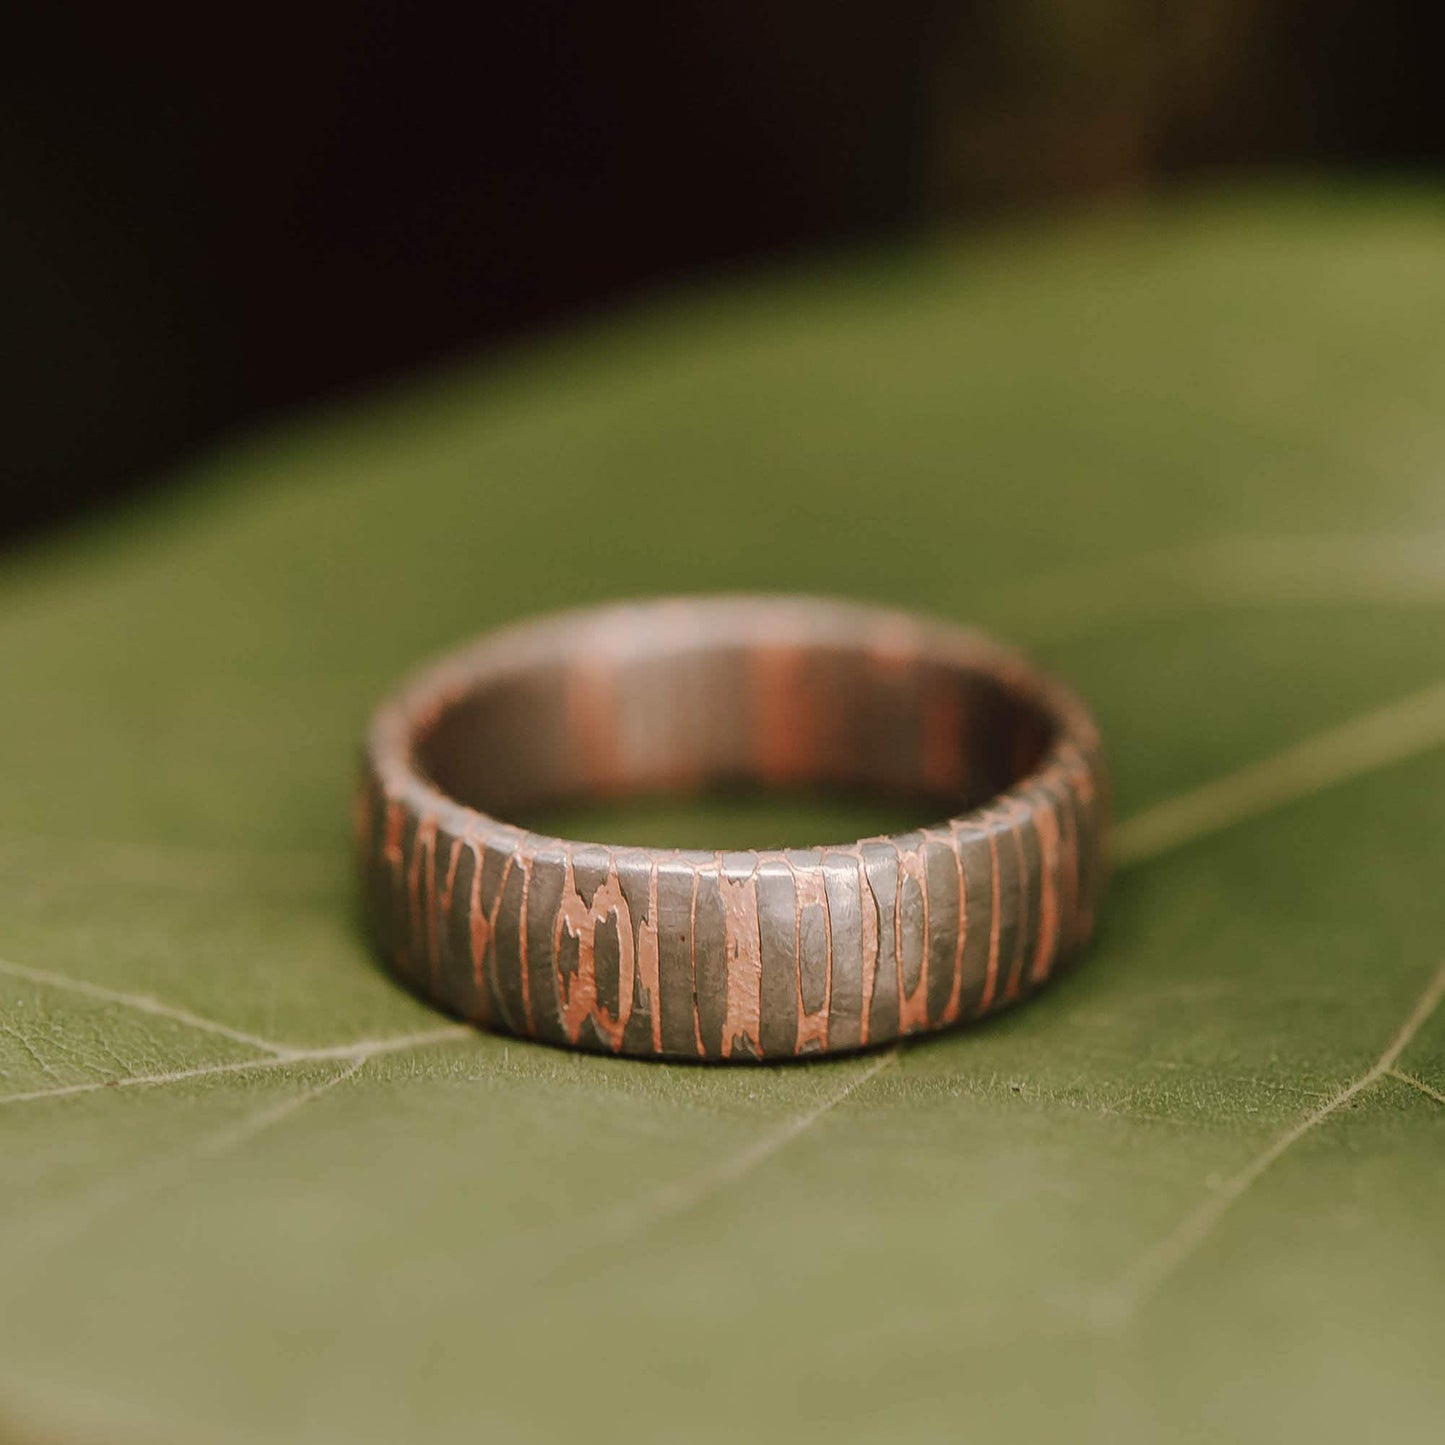 Superconductor wedding band. This photo shows an etched titanium-niobium and copper striped ring. (Horizontal with leaf background)